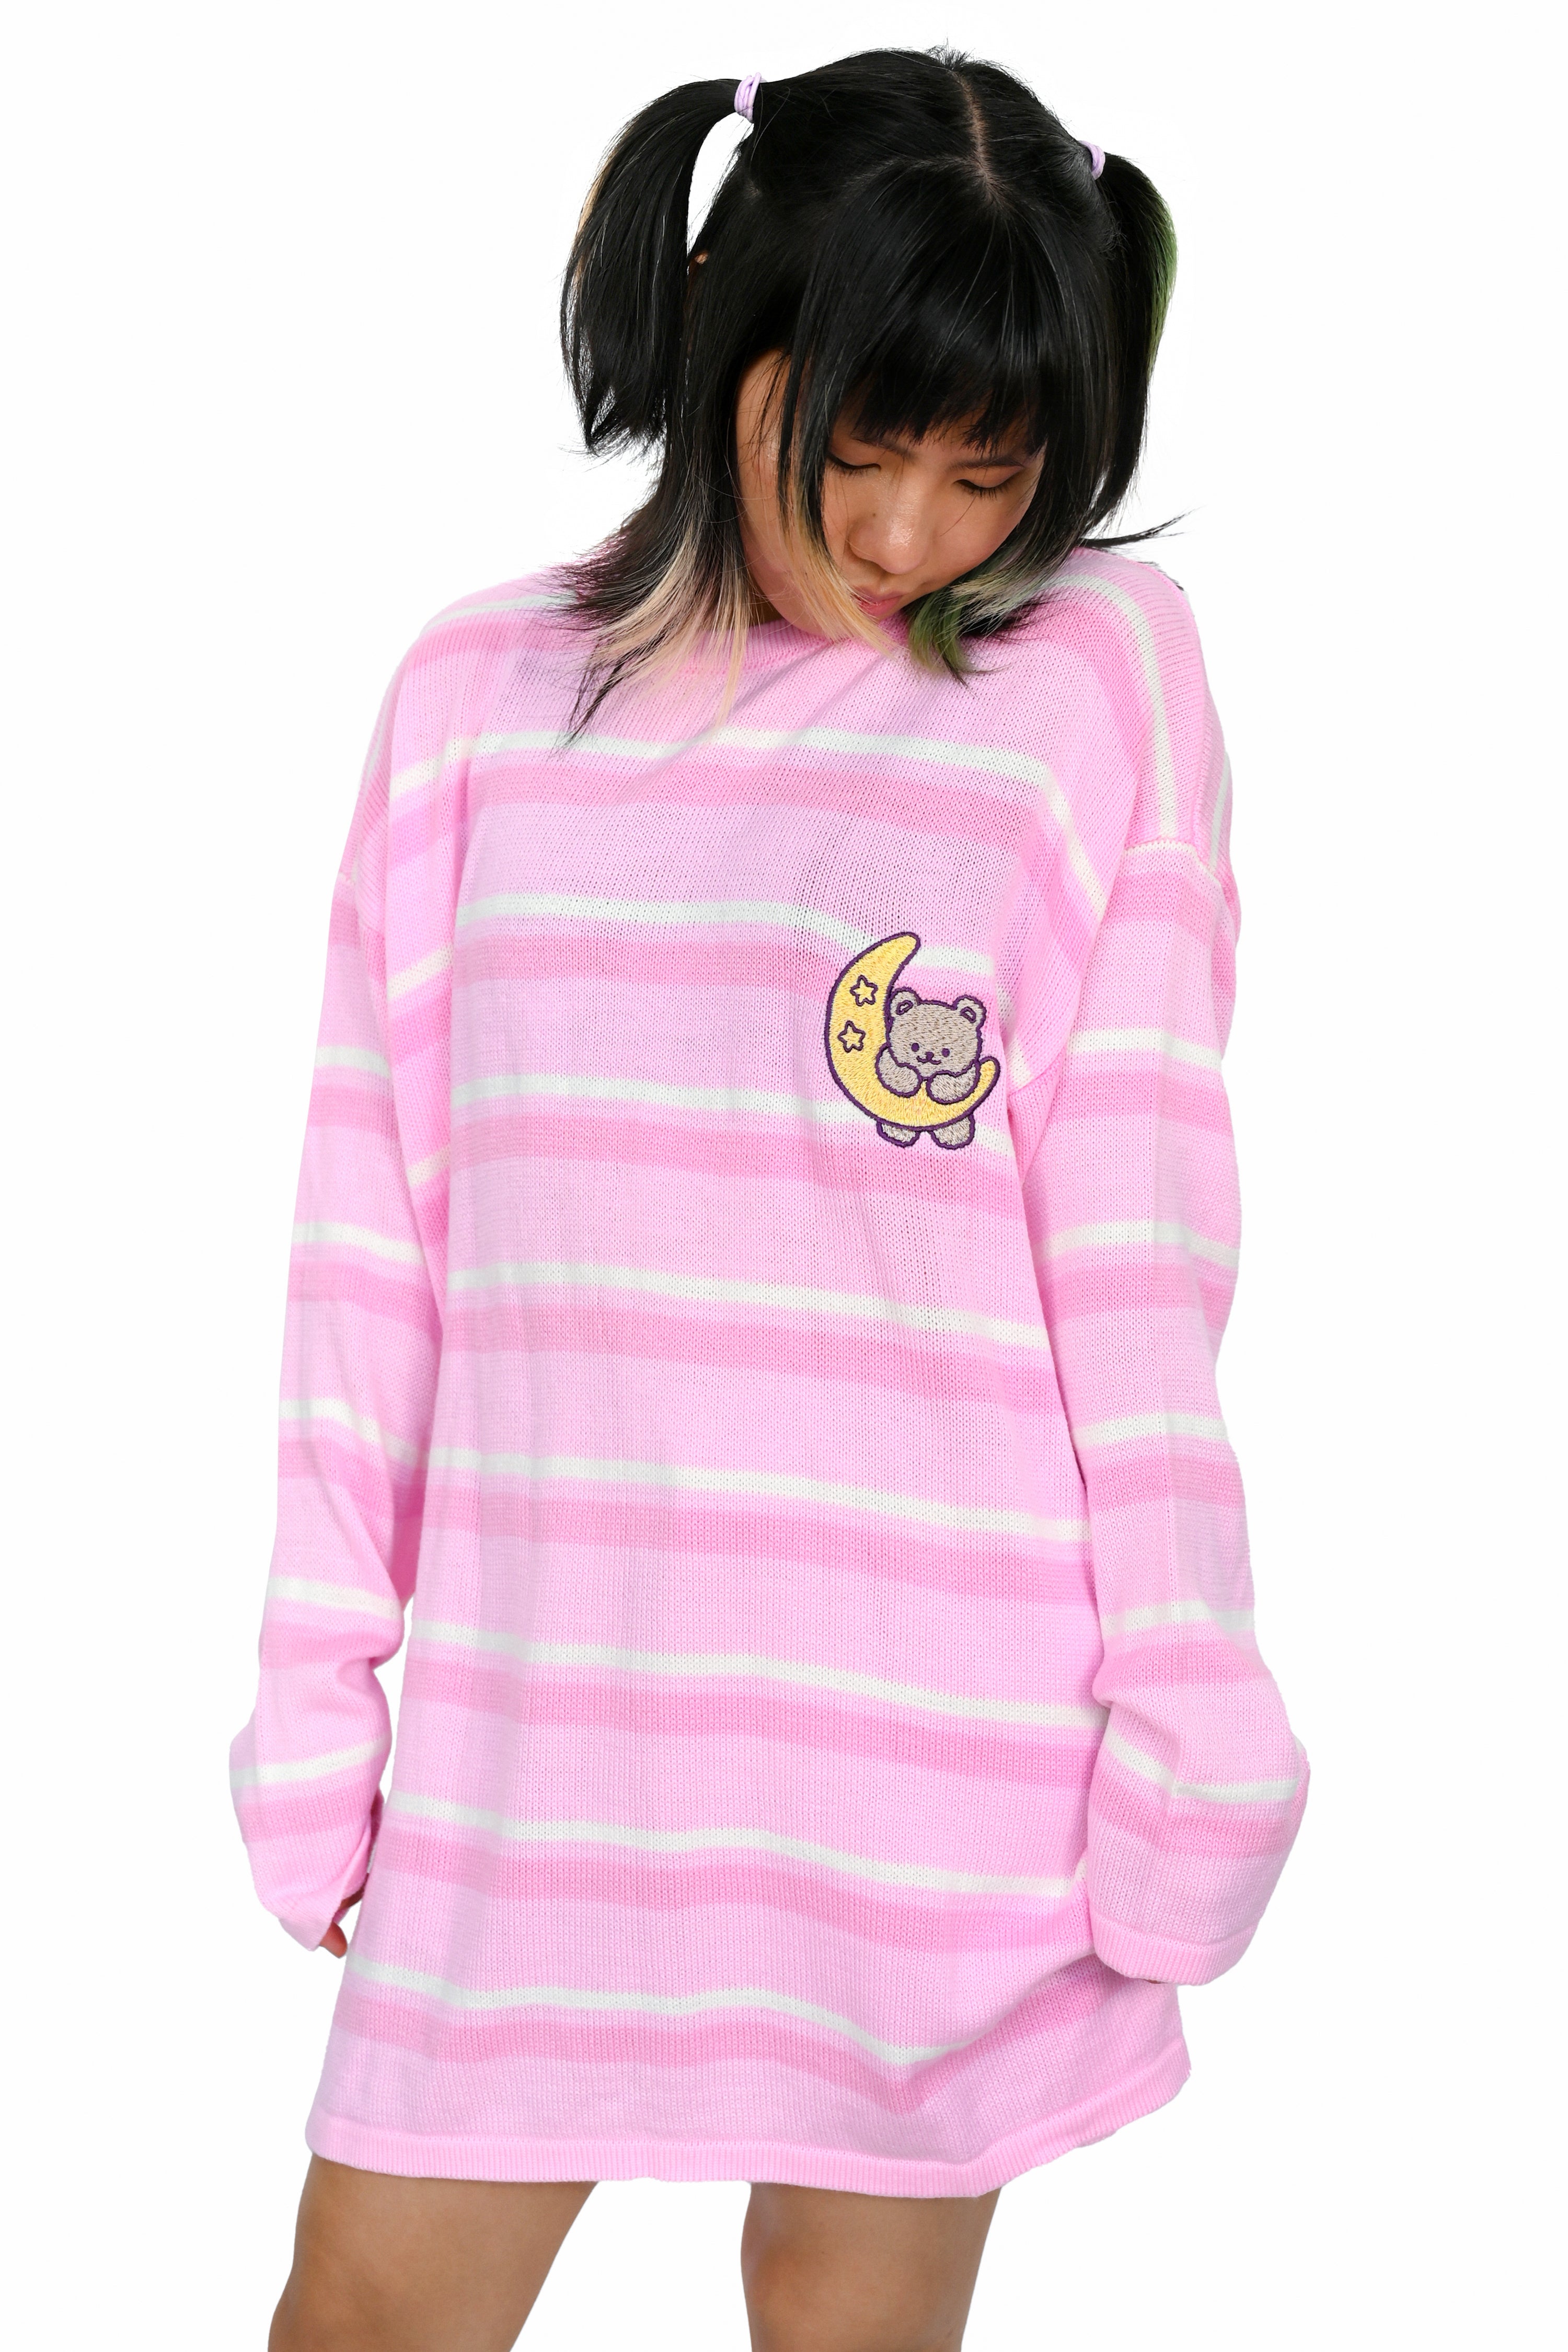 Pink Striped sweater with embroidered bear hanging off a moon